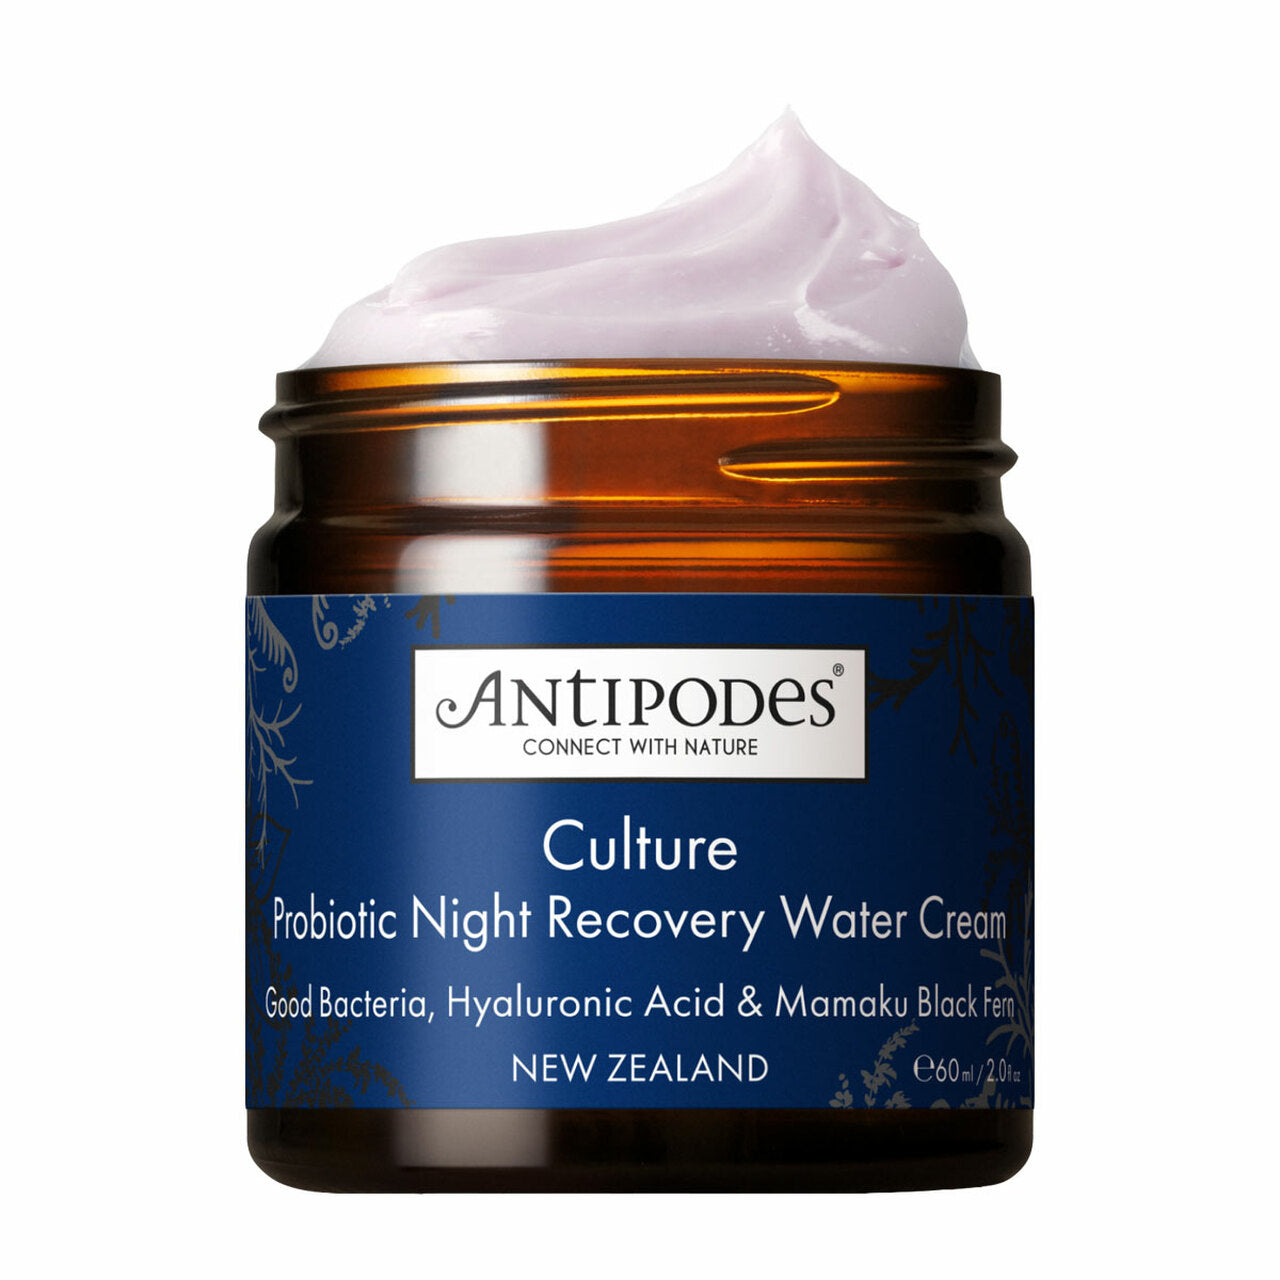 Antipodes Culture Probiotic Night Recovery Water Cream 60ml.